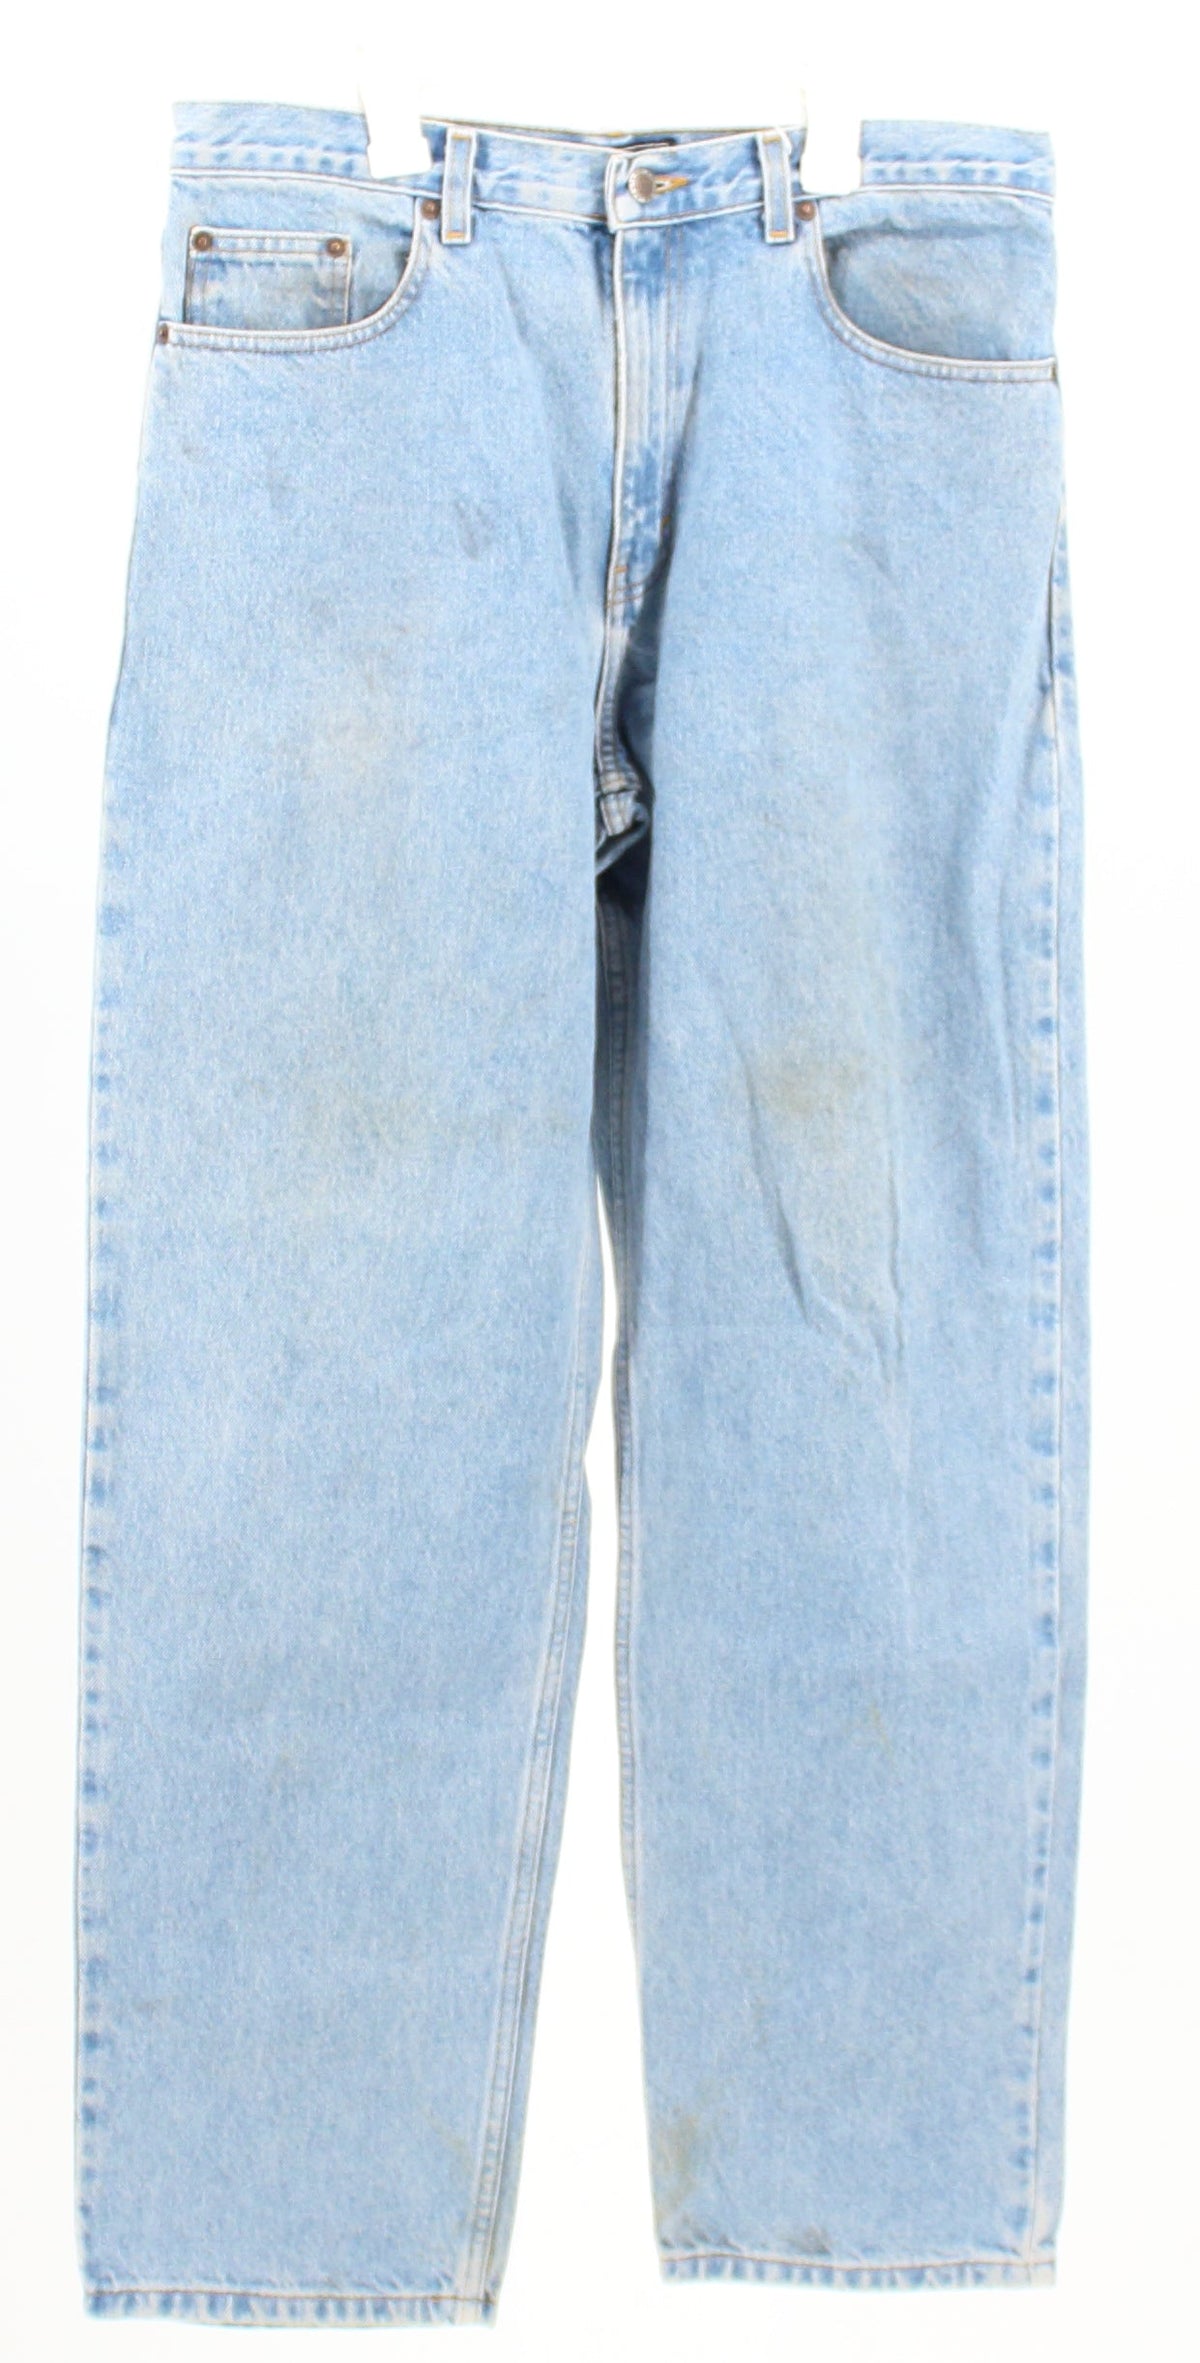 Route 66 Relaxed Fit Light Wash Jeans